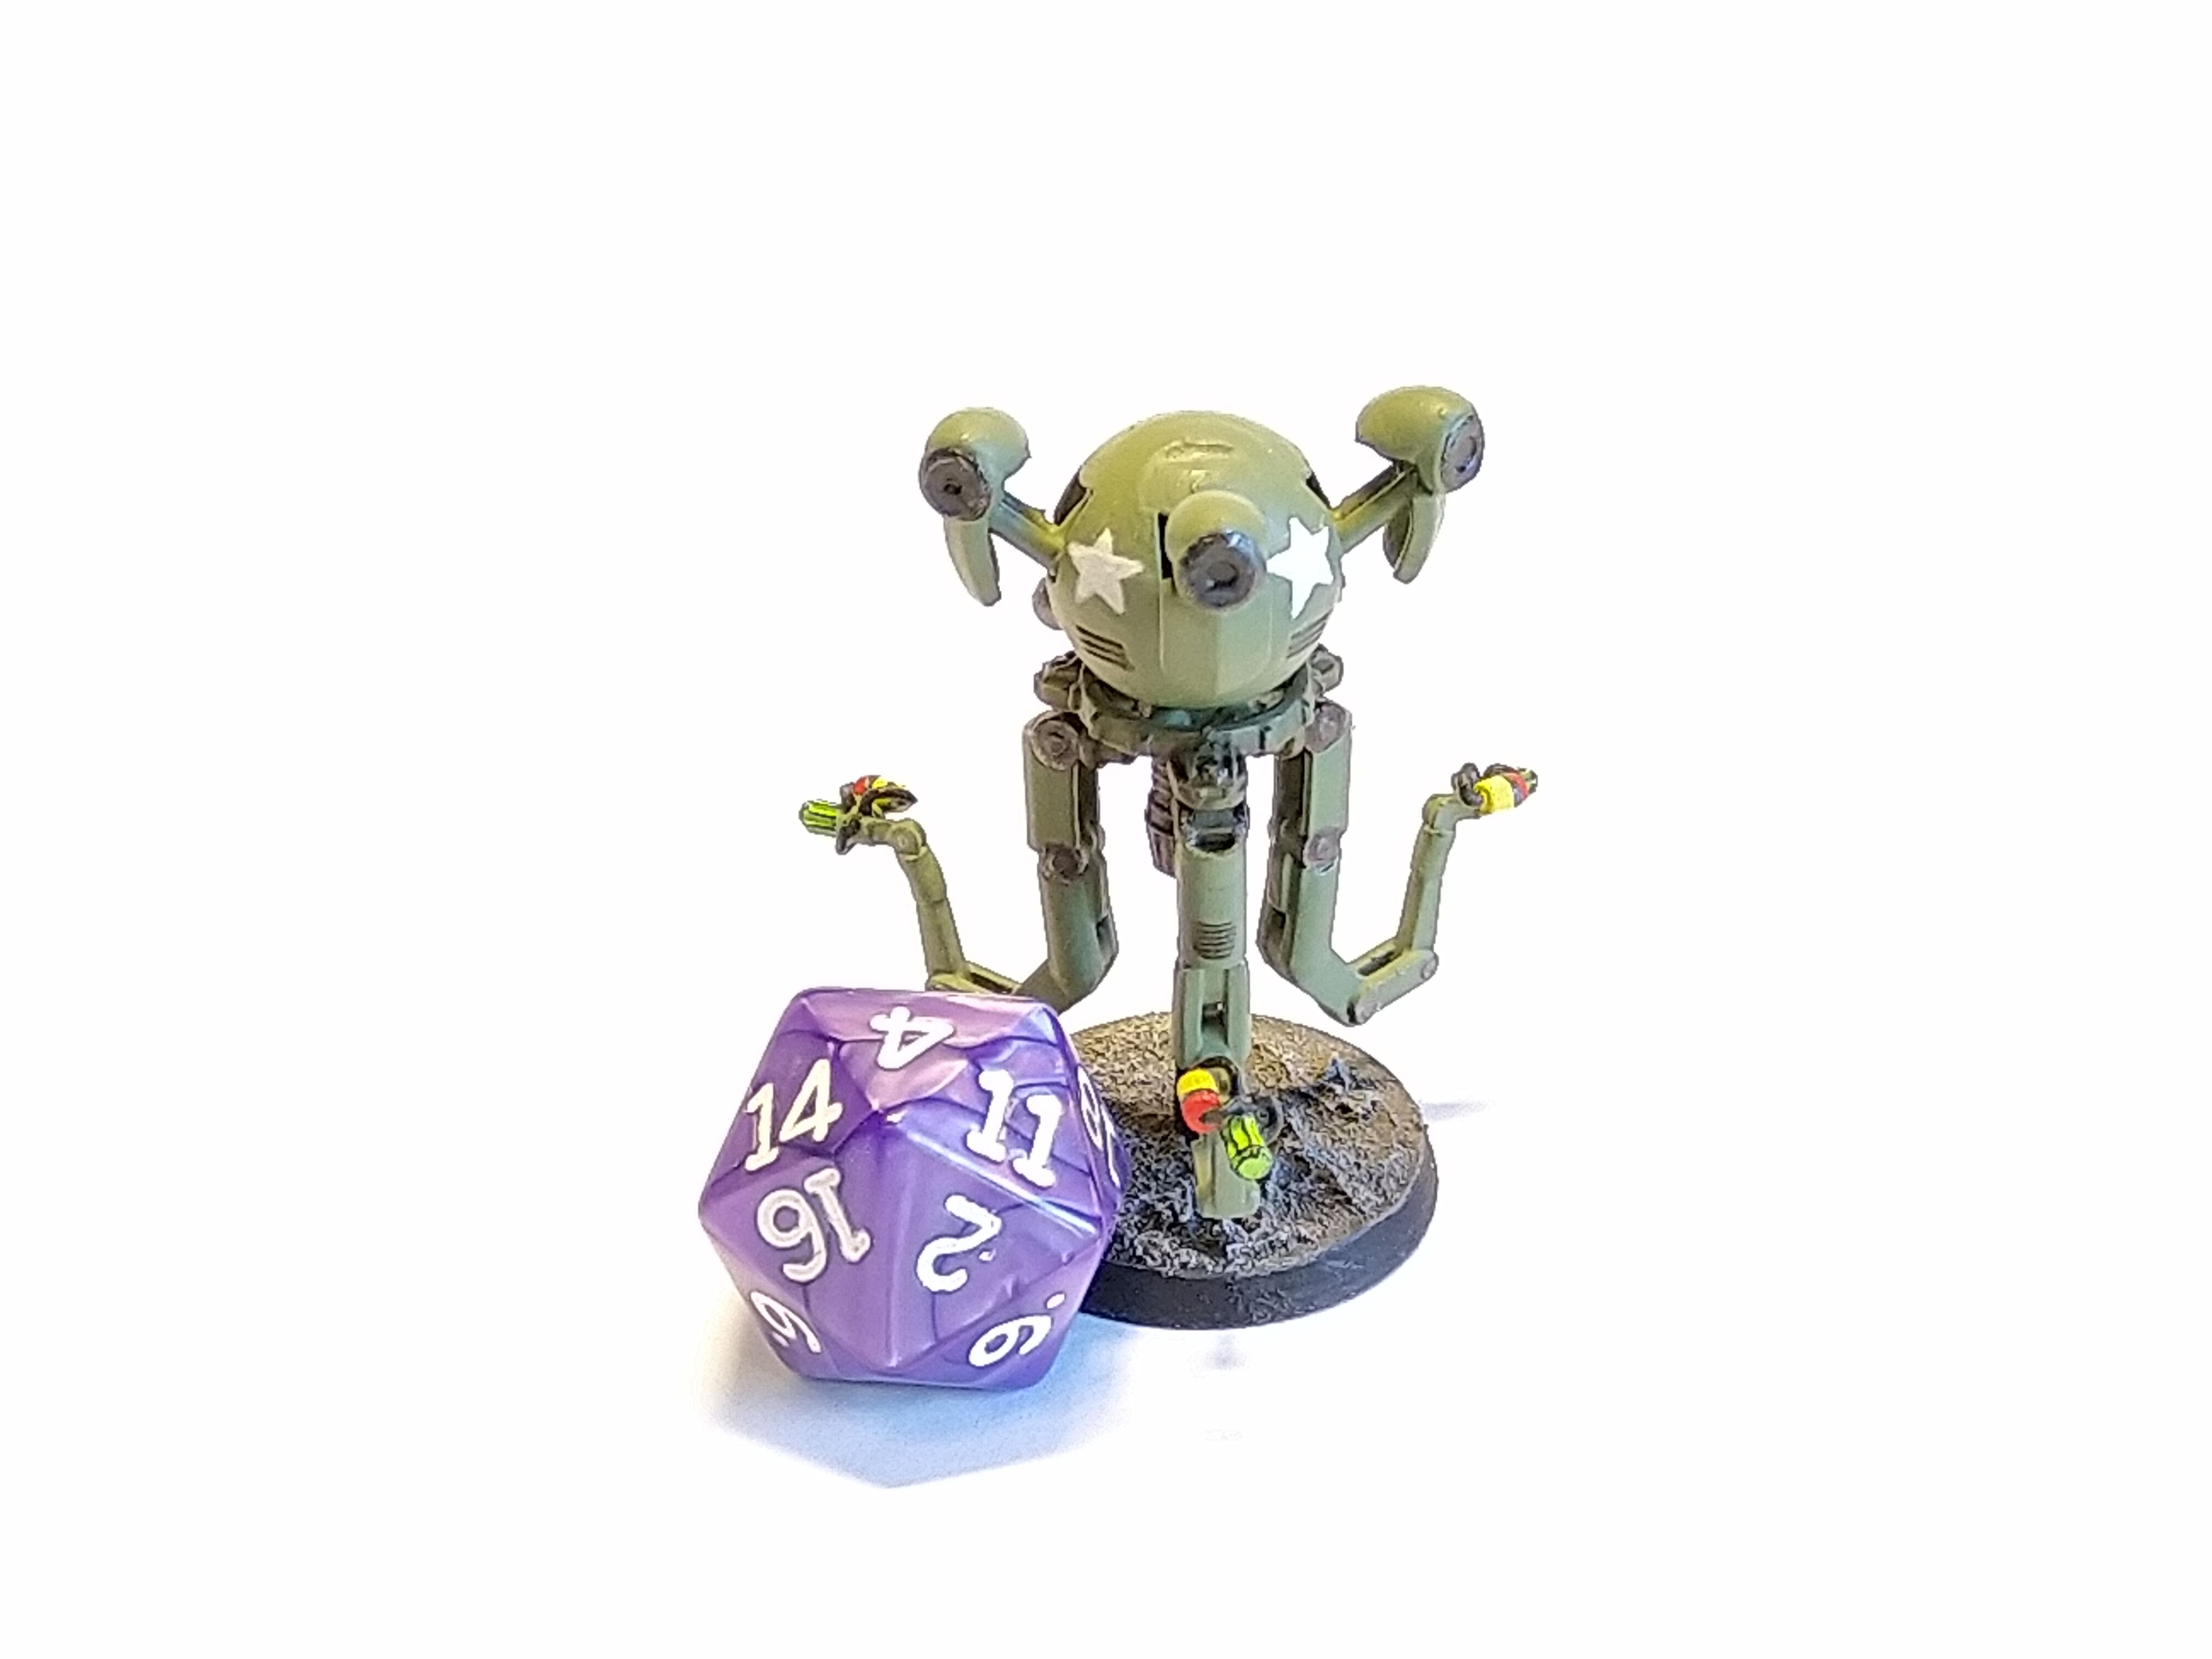 FALLOUT ROBOT INSPIRED BY MR. GUTSY - 28MM MINIATURE